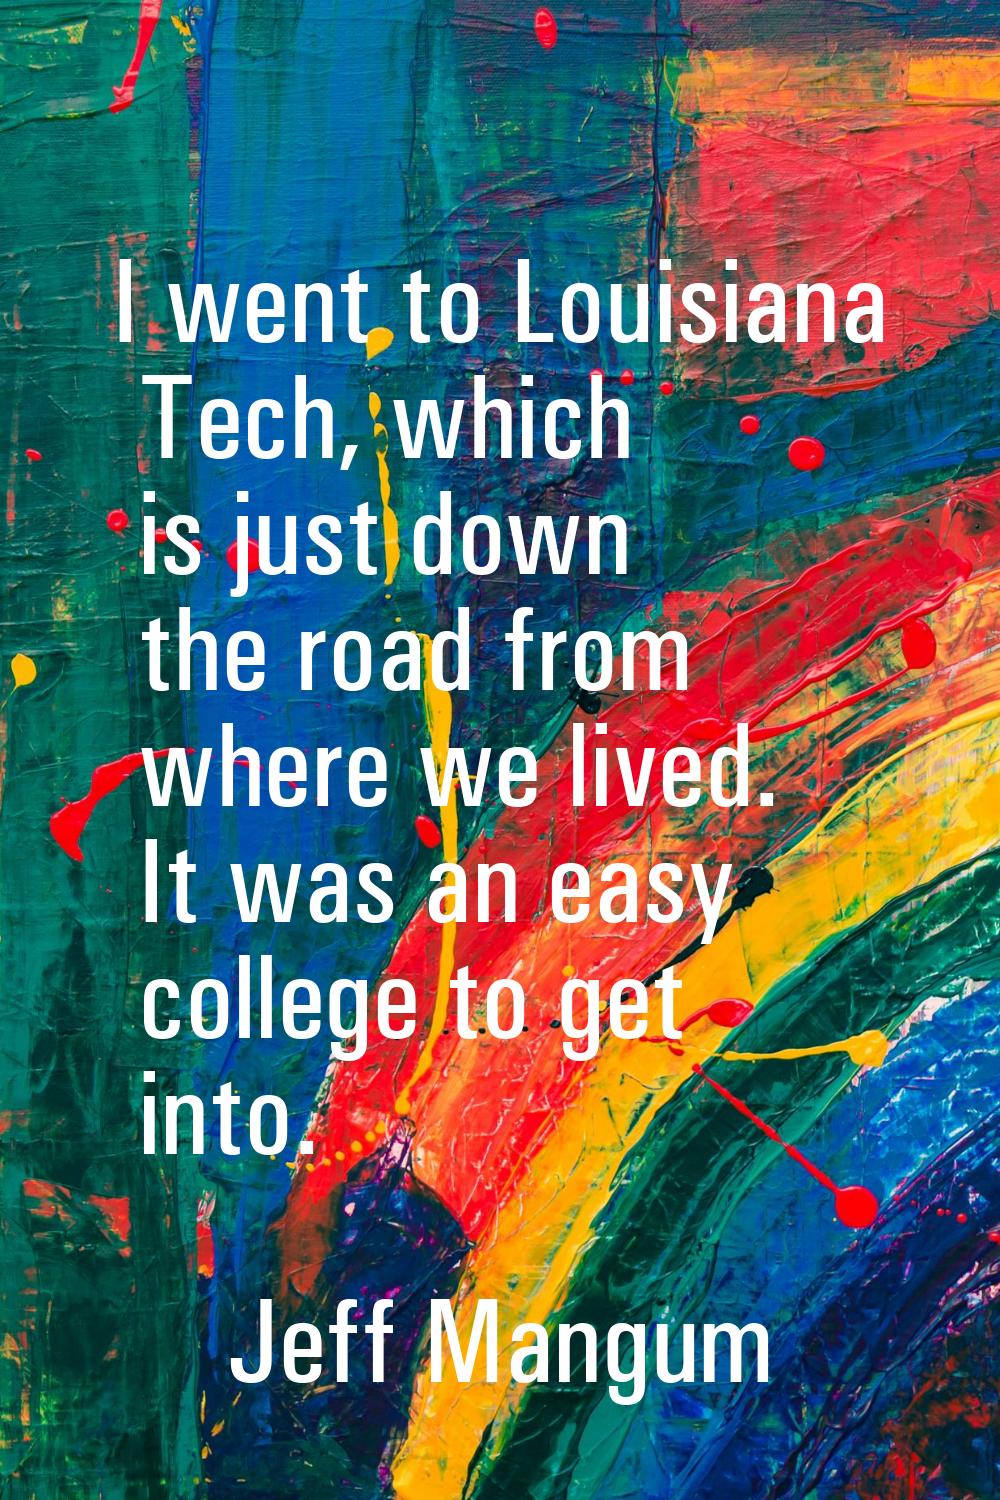 I went to Louisiana Tech, which is just down the road from where we lived. It was an easy college t